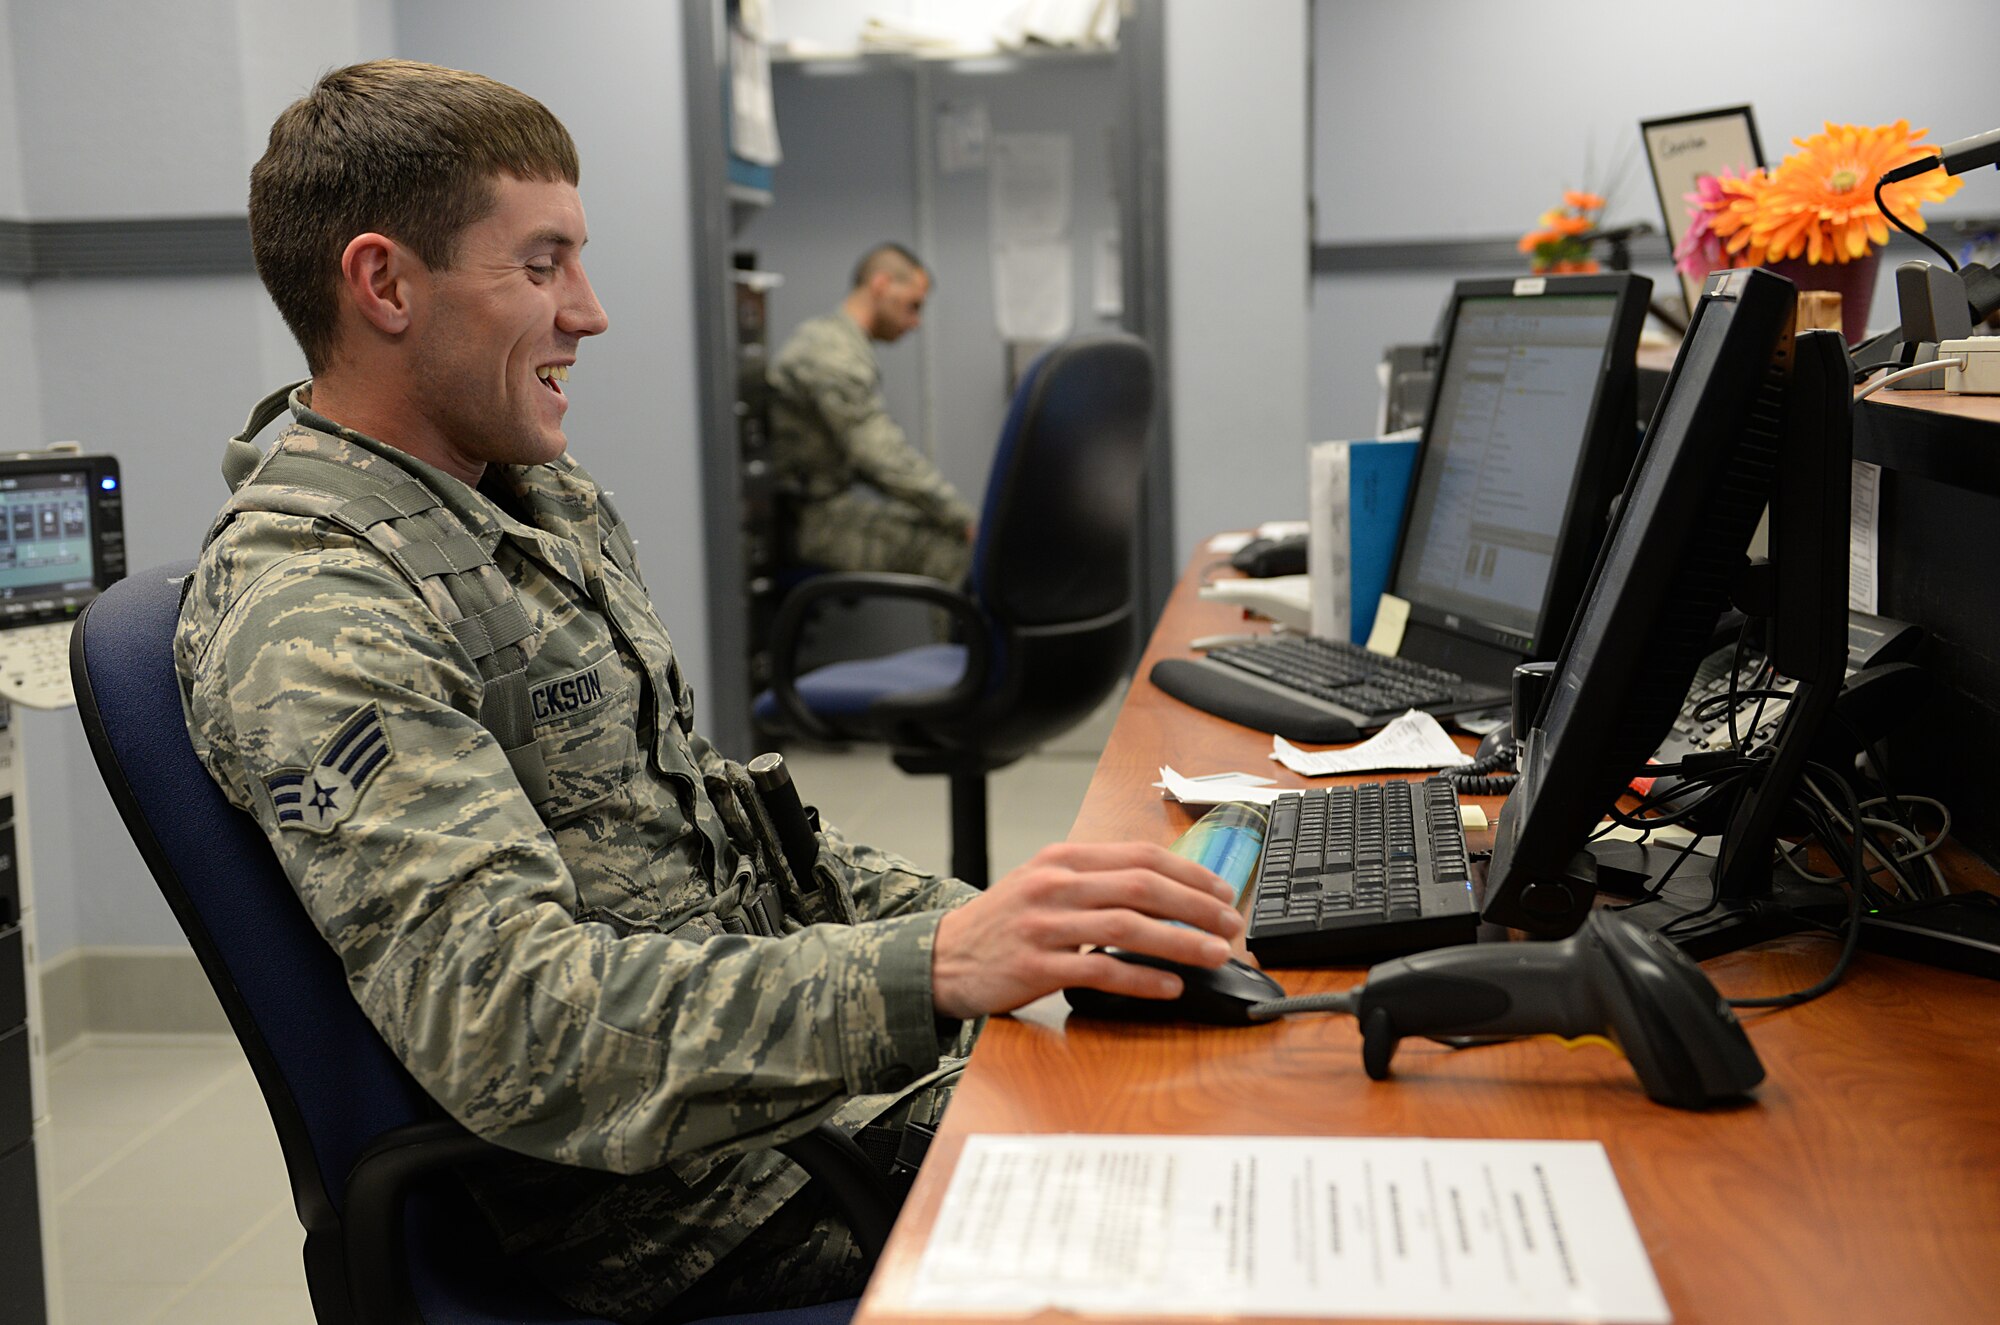 Senior Airman Danny Jackson, pass and identification shift supervisor, issues a temporary pass for a visitor March 12, 2015, Keesler Air Force Base, Miss. 81st SFS Airmen perform multiple roles to keep members of Keesler safe, ranging from identification checks at base entrances to searching for explosives and narcotics with military working dogs. (U.S. Air Force photo by Senior Airman Holly Mansfield)